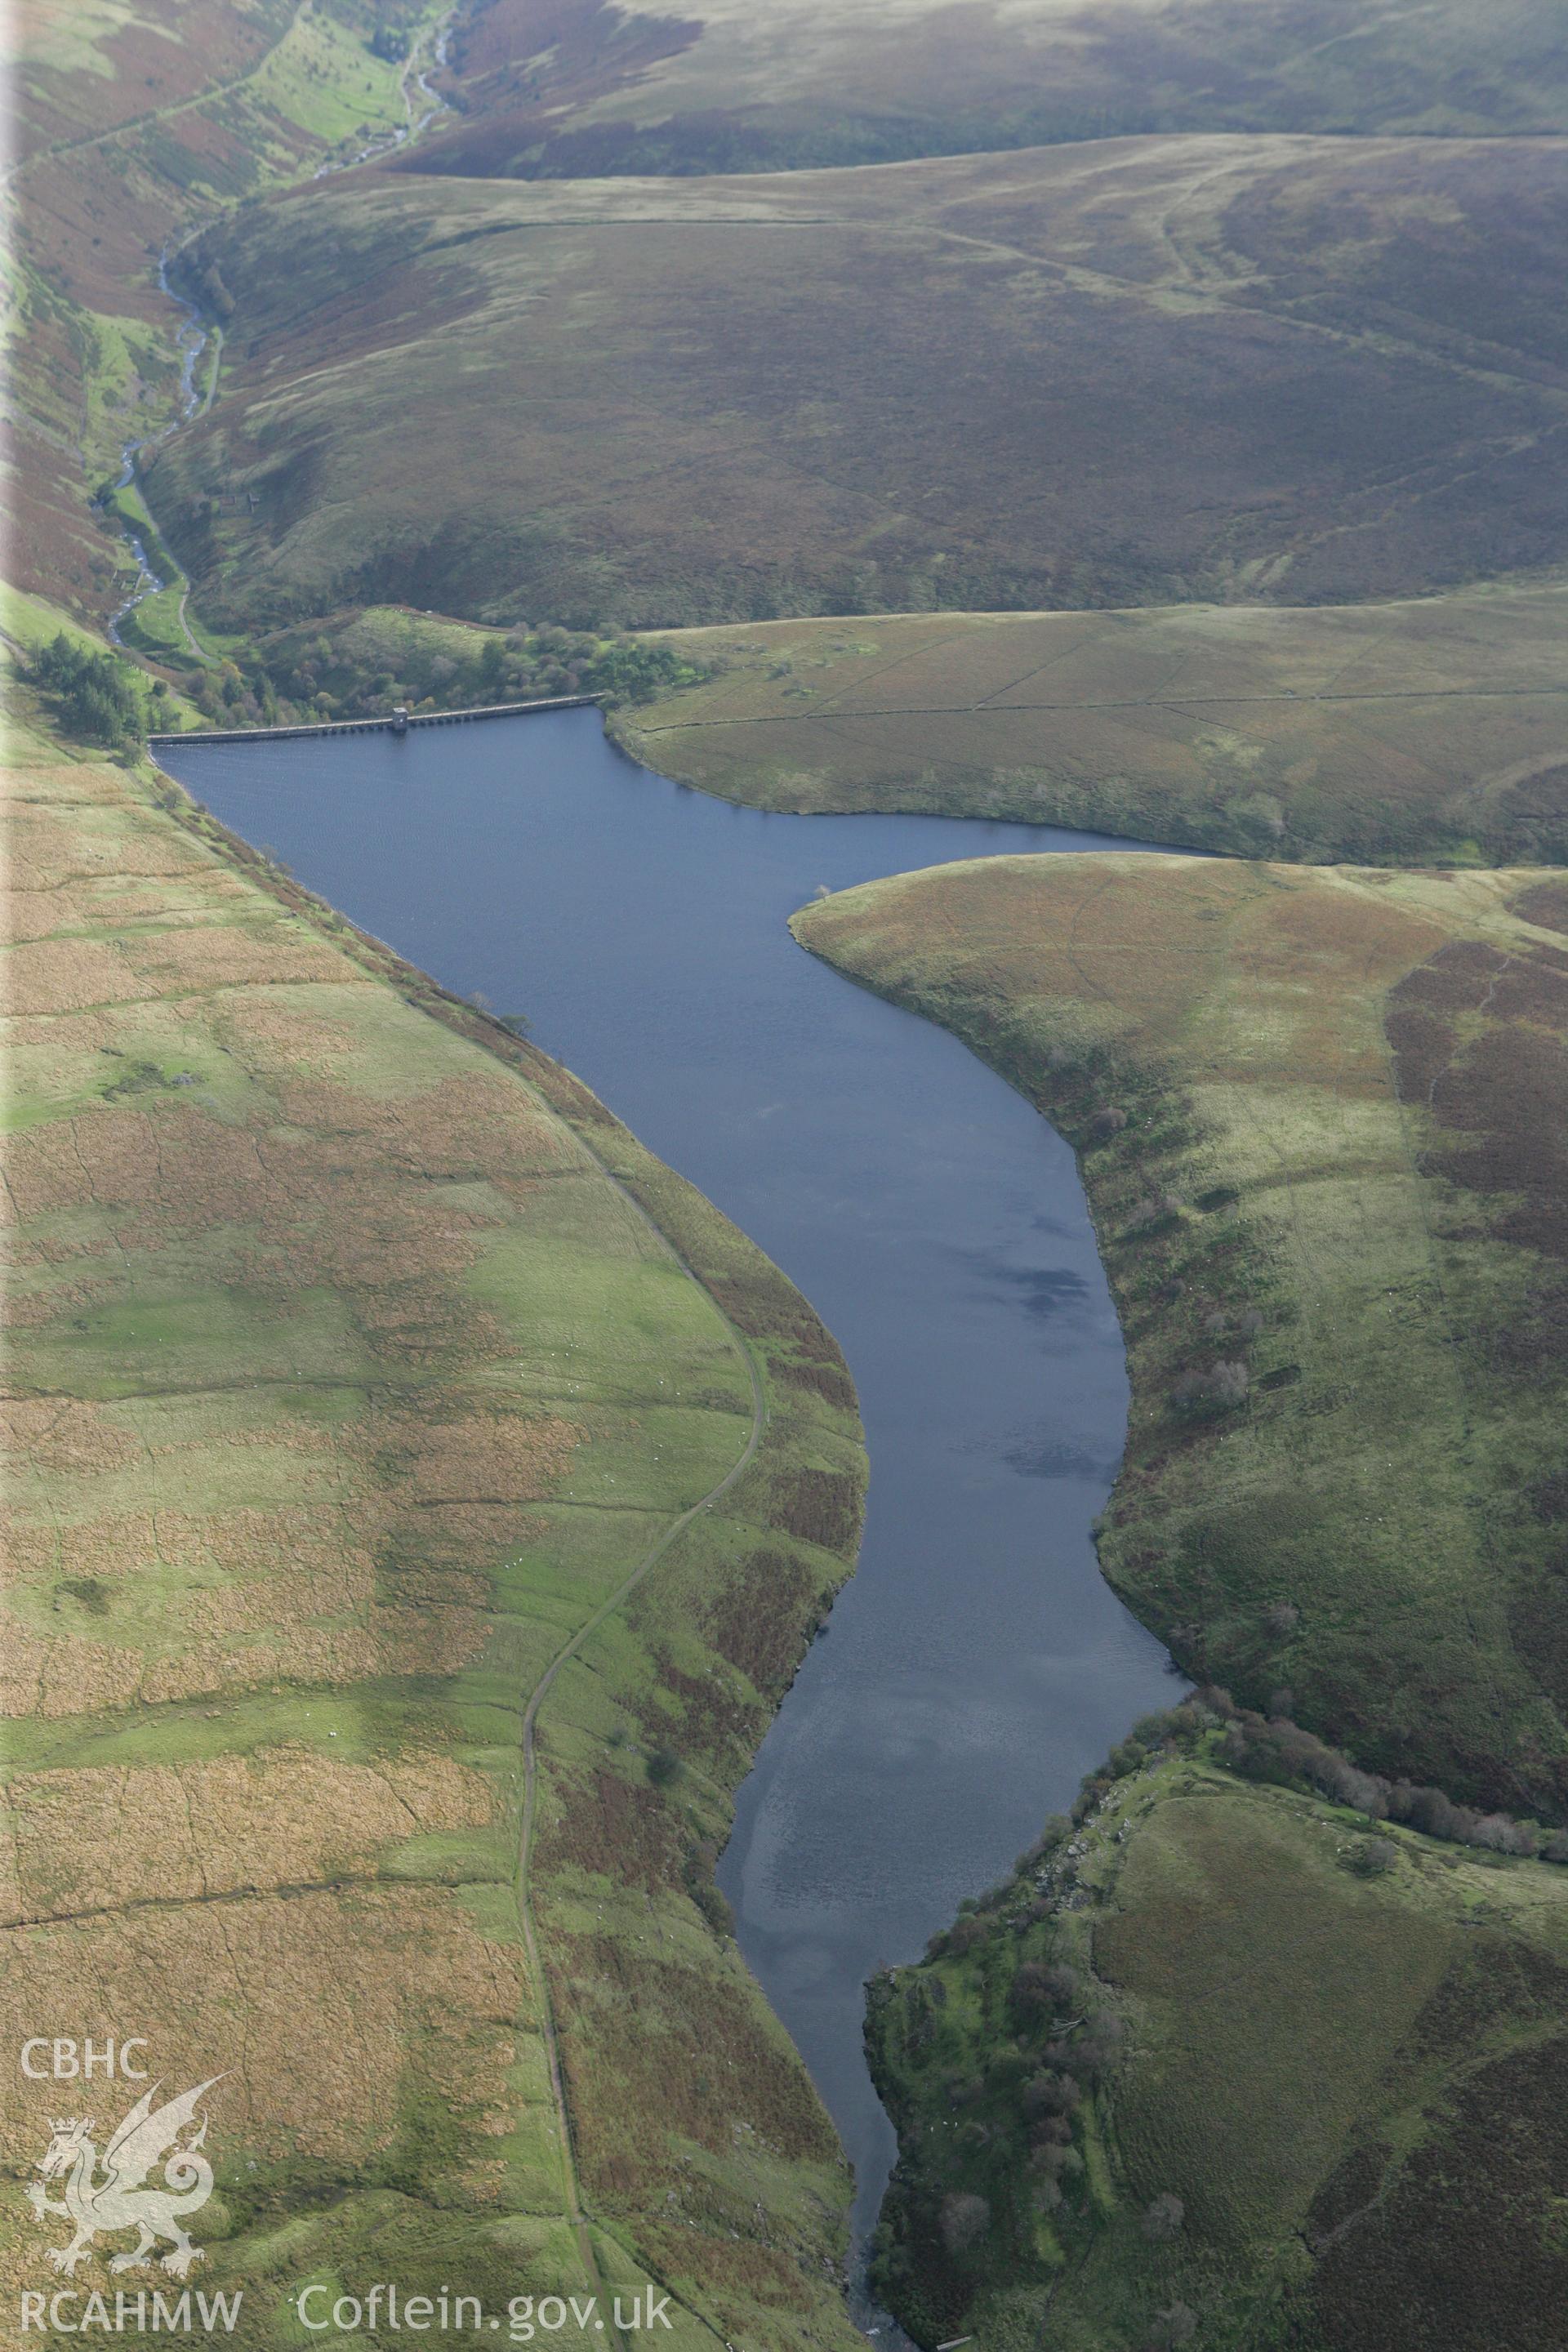 RCAHMW colour oblique photograph of Grwyne Fawr Reservoir, from the north-west. Taken by Toby Driver on 10/10/2008.